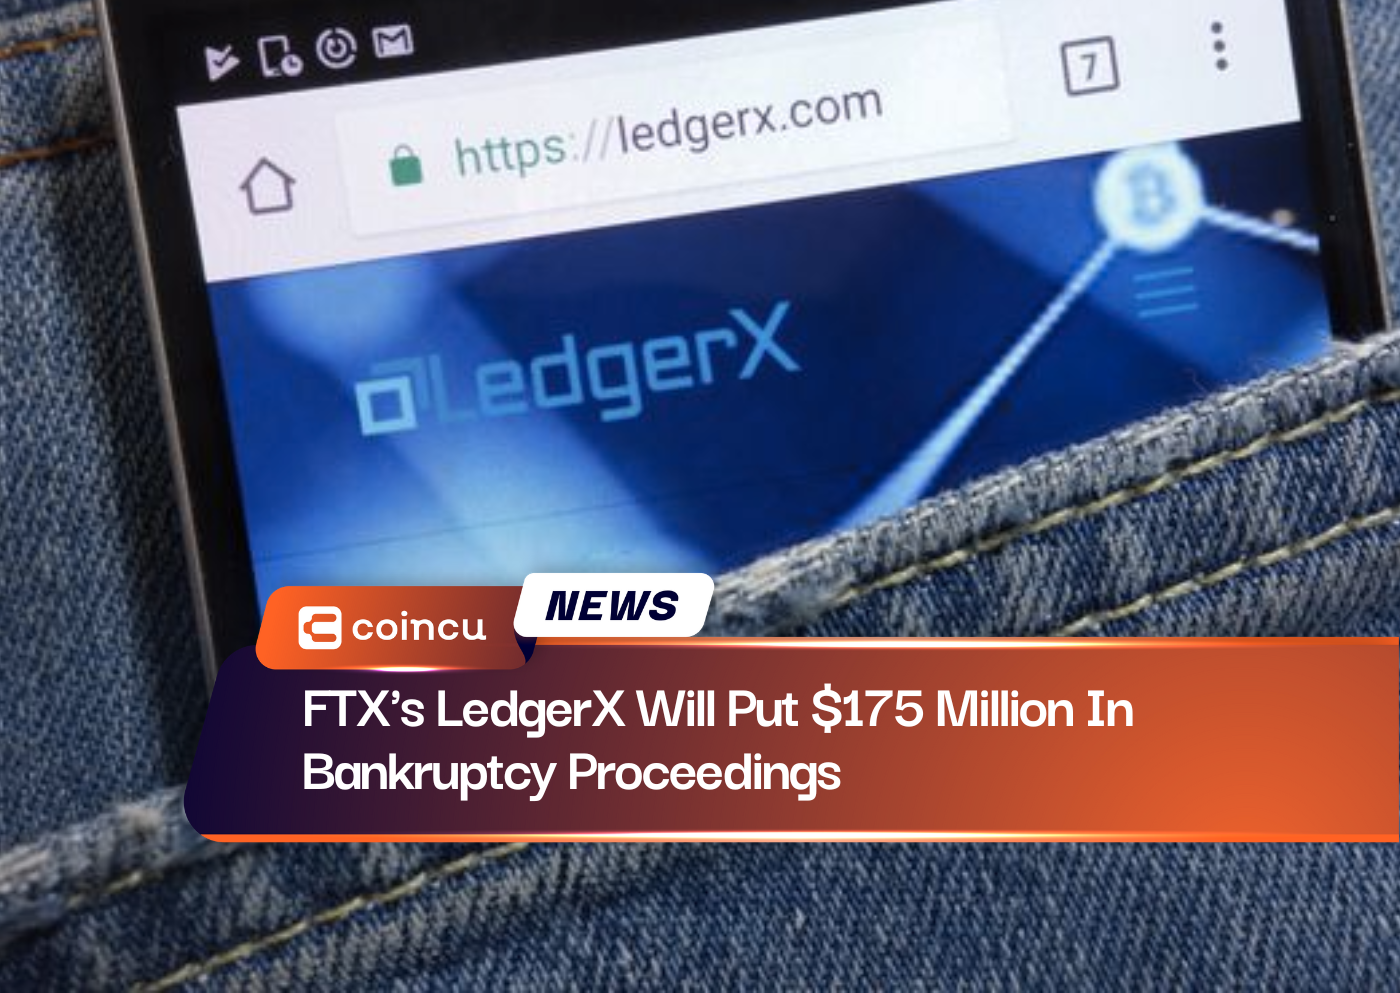 FTX's LedgerX Will Put $175 Million In Bankruptcy Proceedings